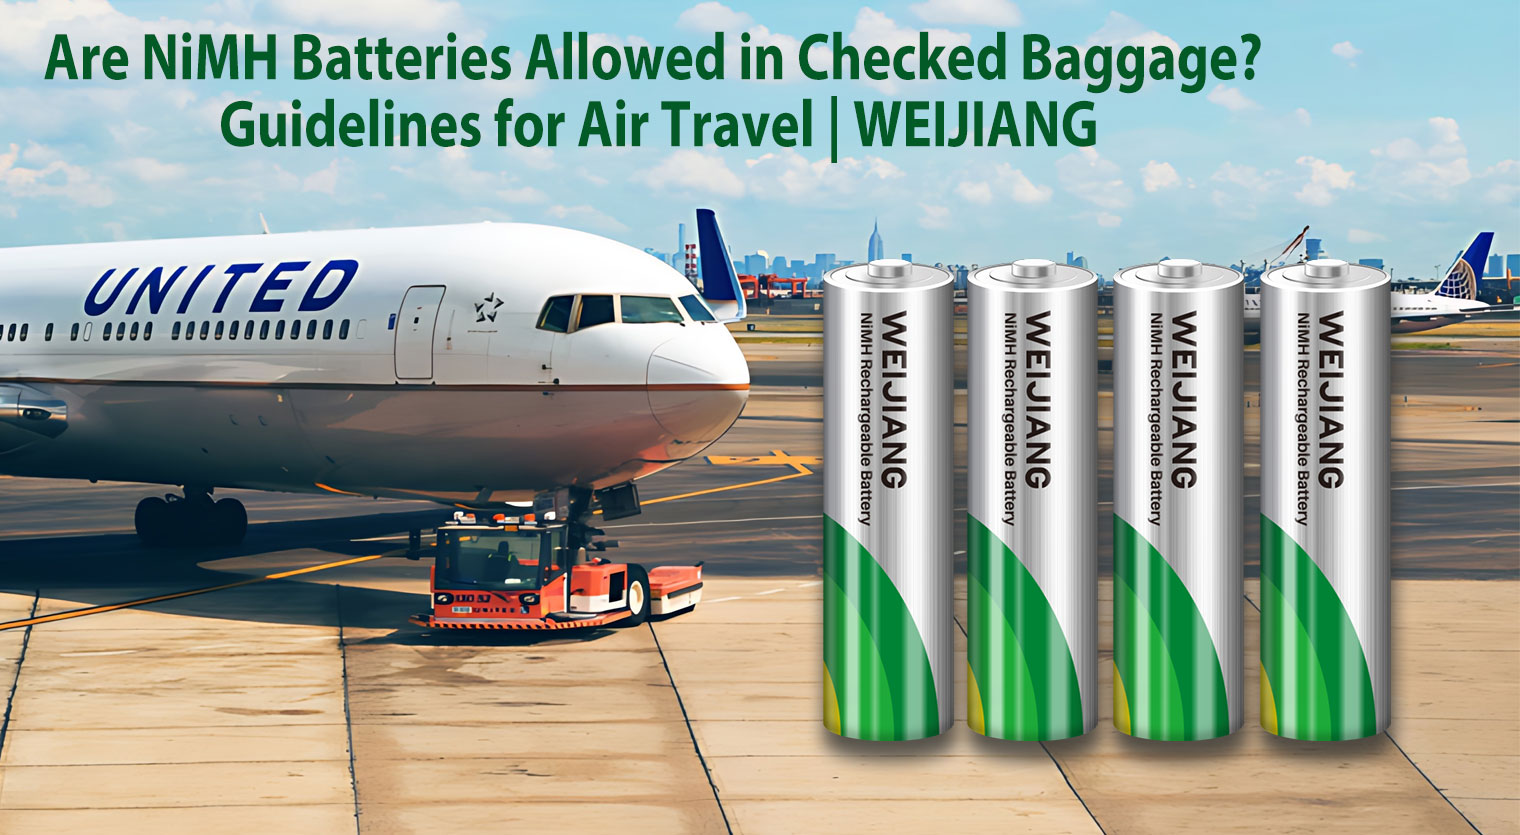 Are NiMH Batteries Allowed in Checked Baggage? Guidelines for Air Travel | WEIJIANG